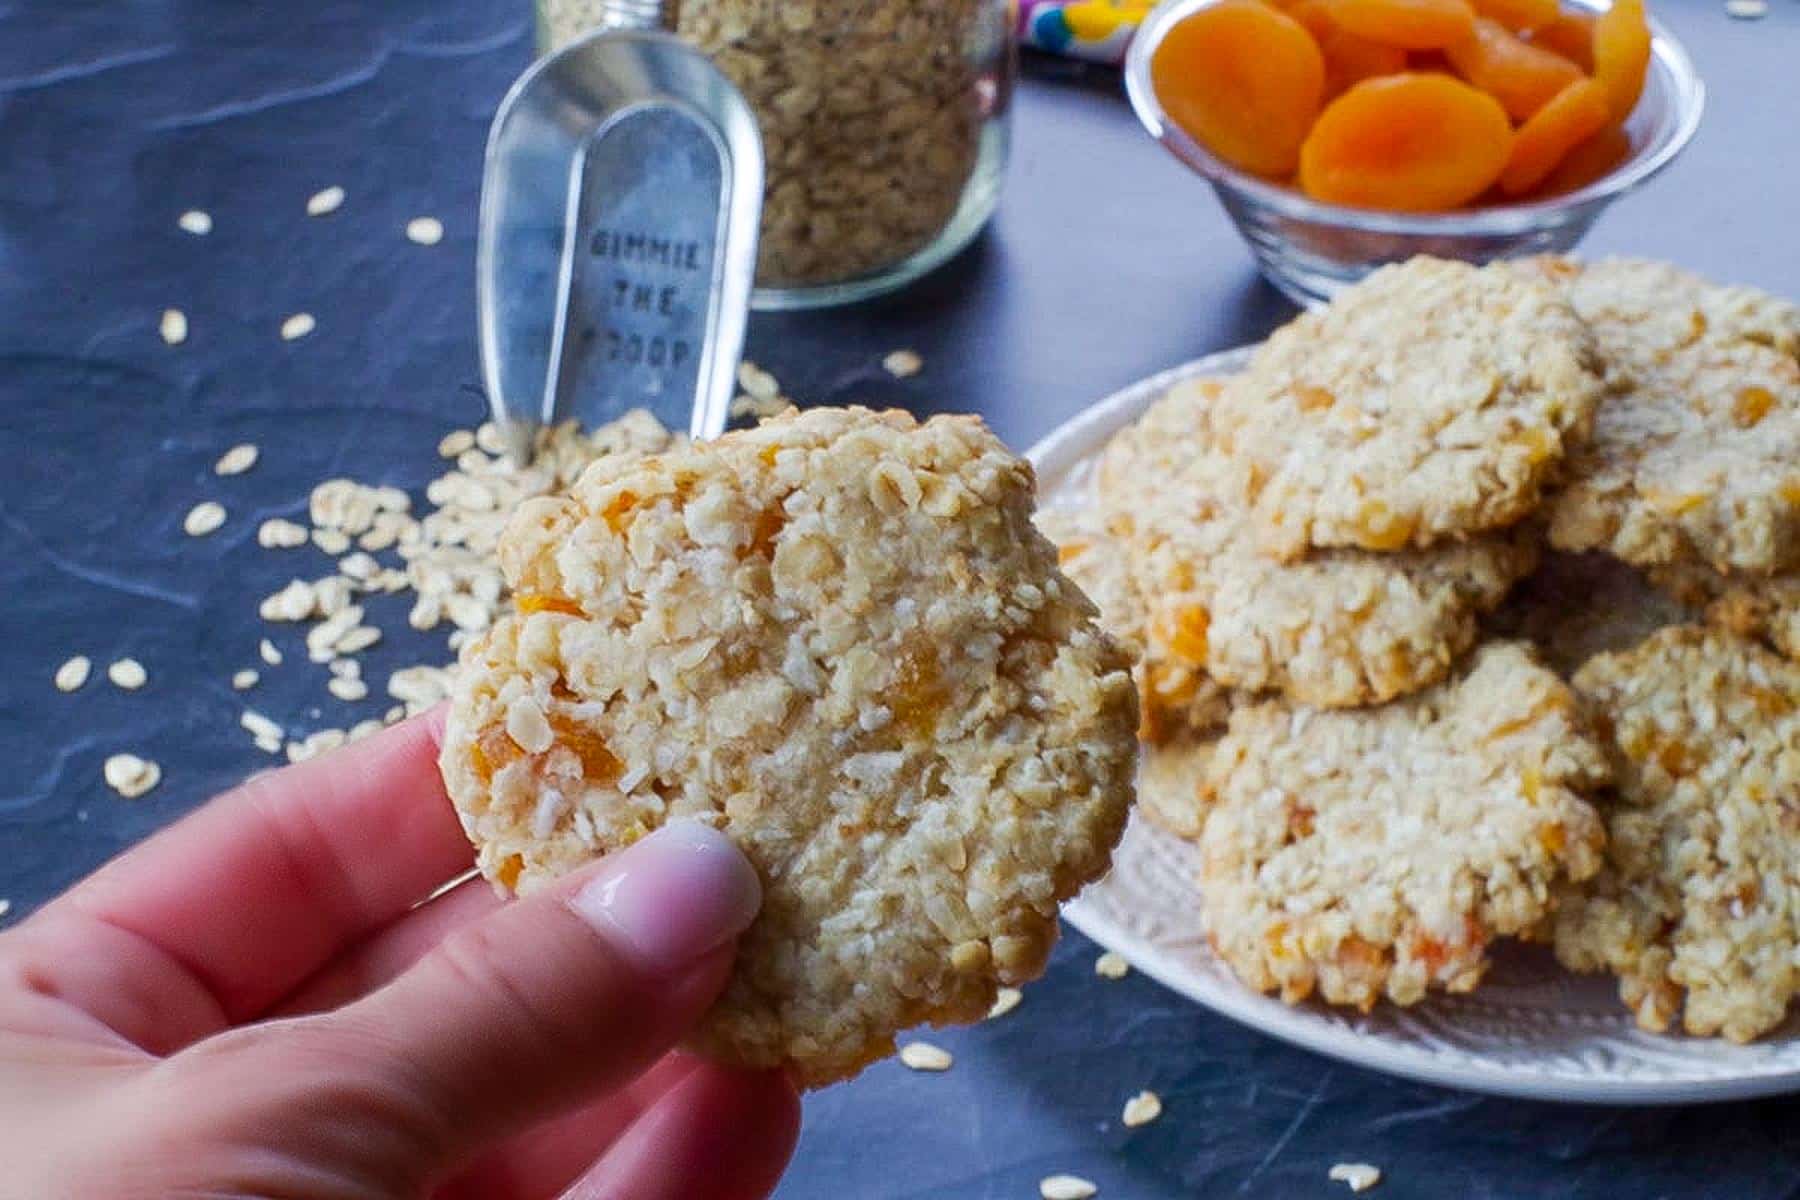 hand holding one Oatmeal Apricot cookie in front of a plate of more Apricot Oatmeal cookies